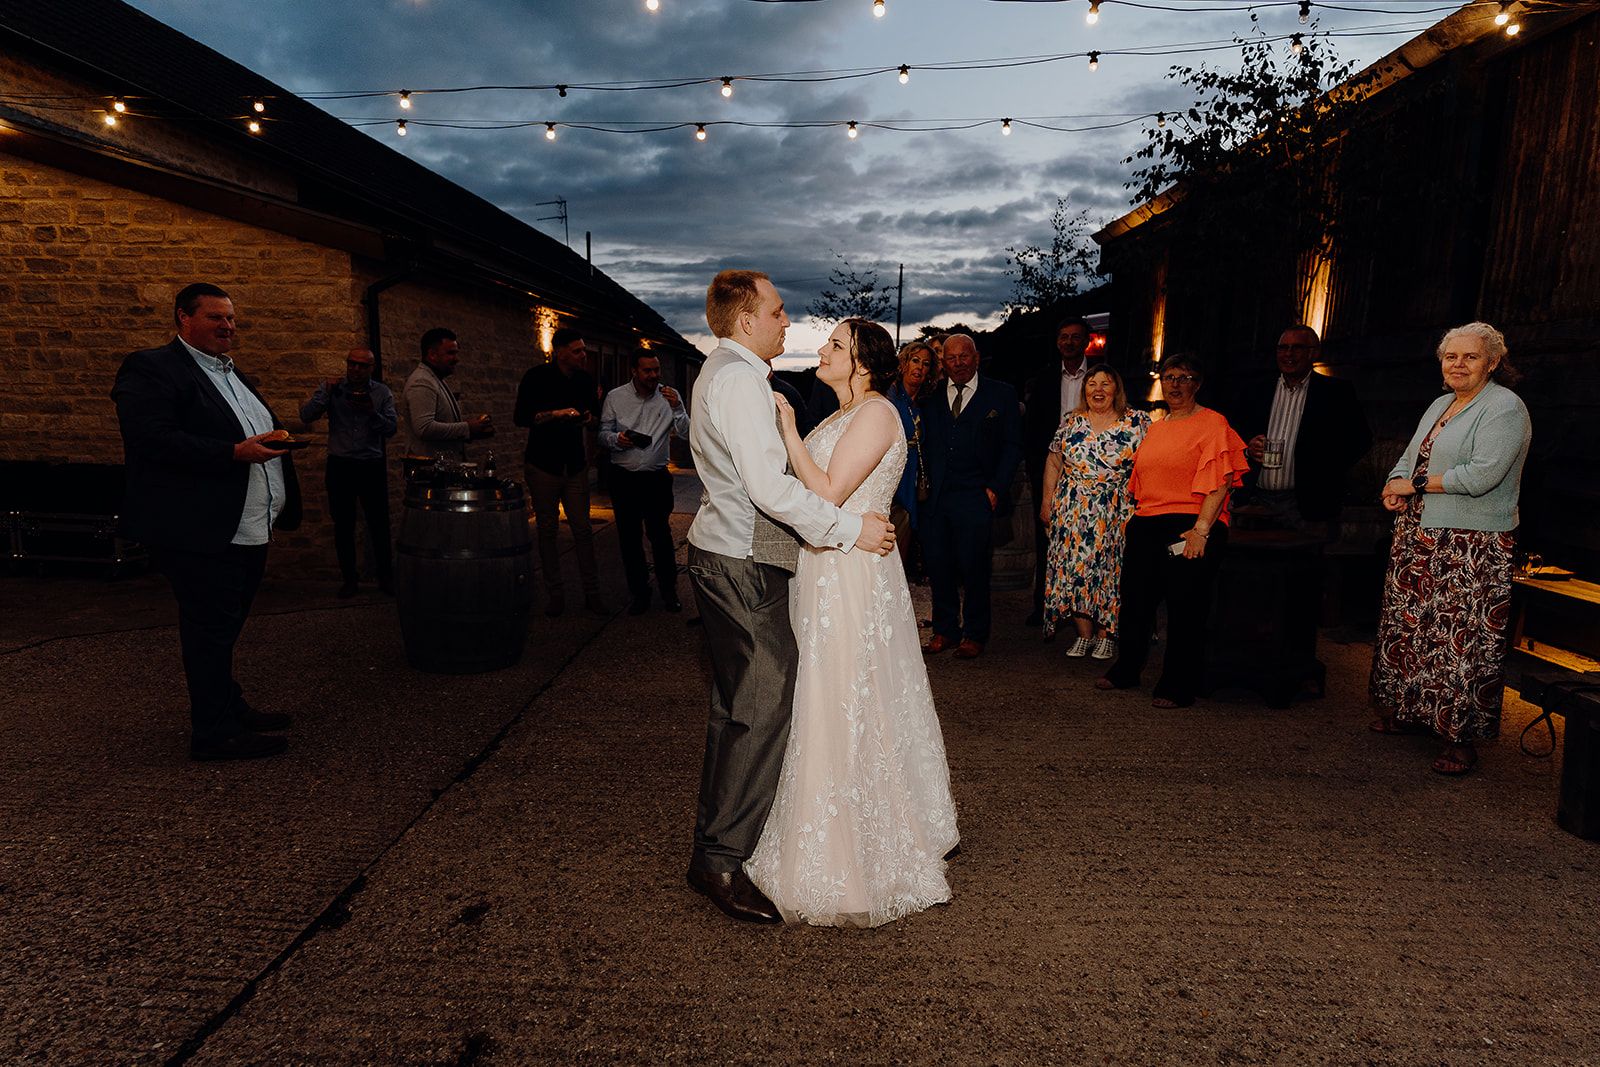 Georgie and James embracing as it guests dark in the courtyard of Huntsmill Farm. Photo thanks to Sam and Steve Photography.